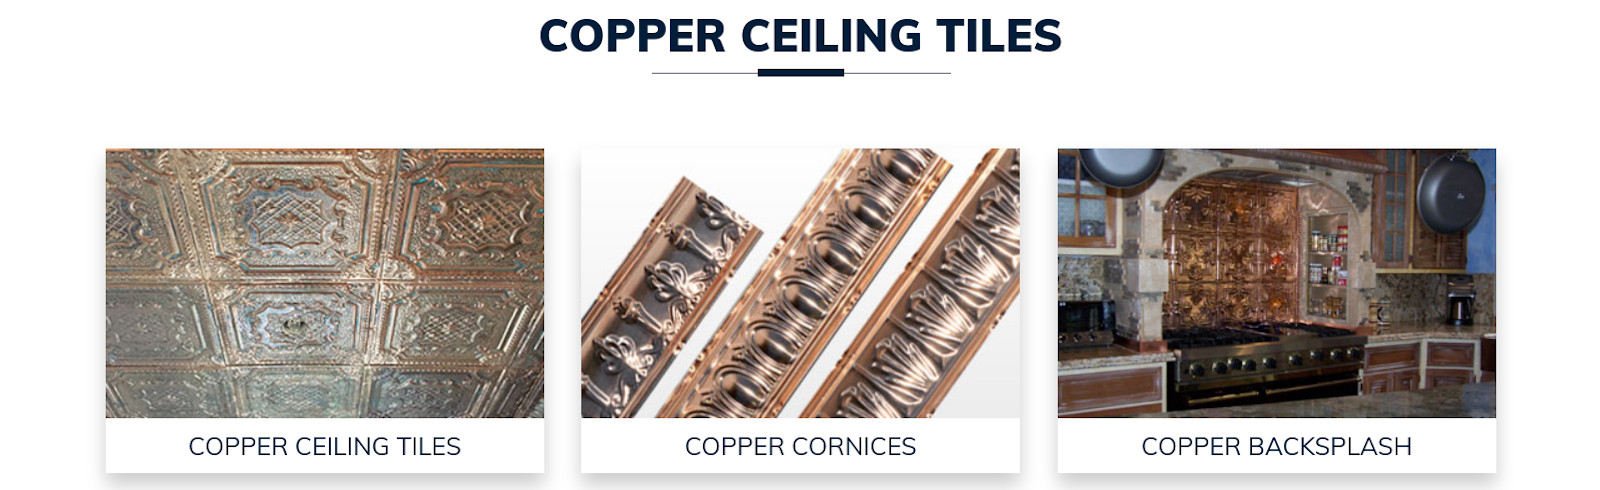 copper ceiling tiles clearance price